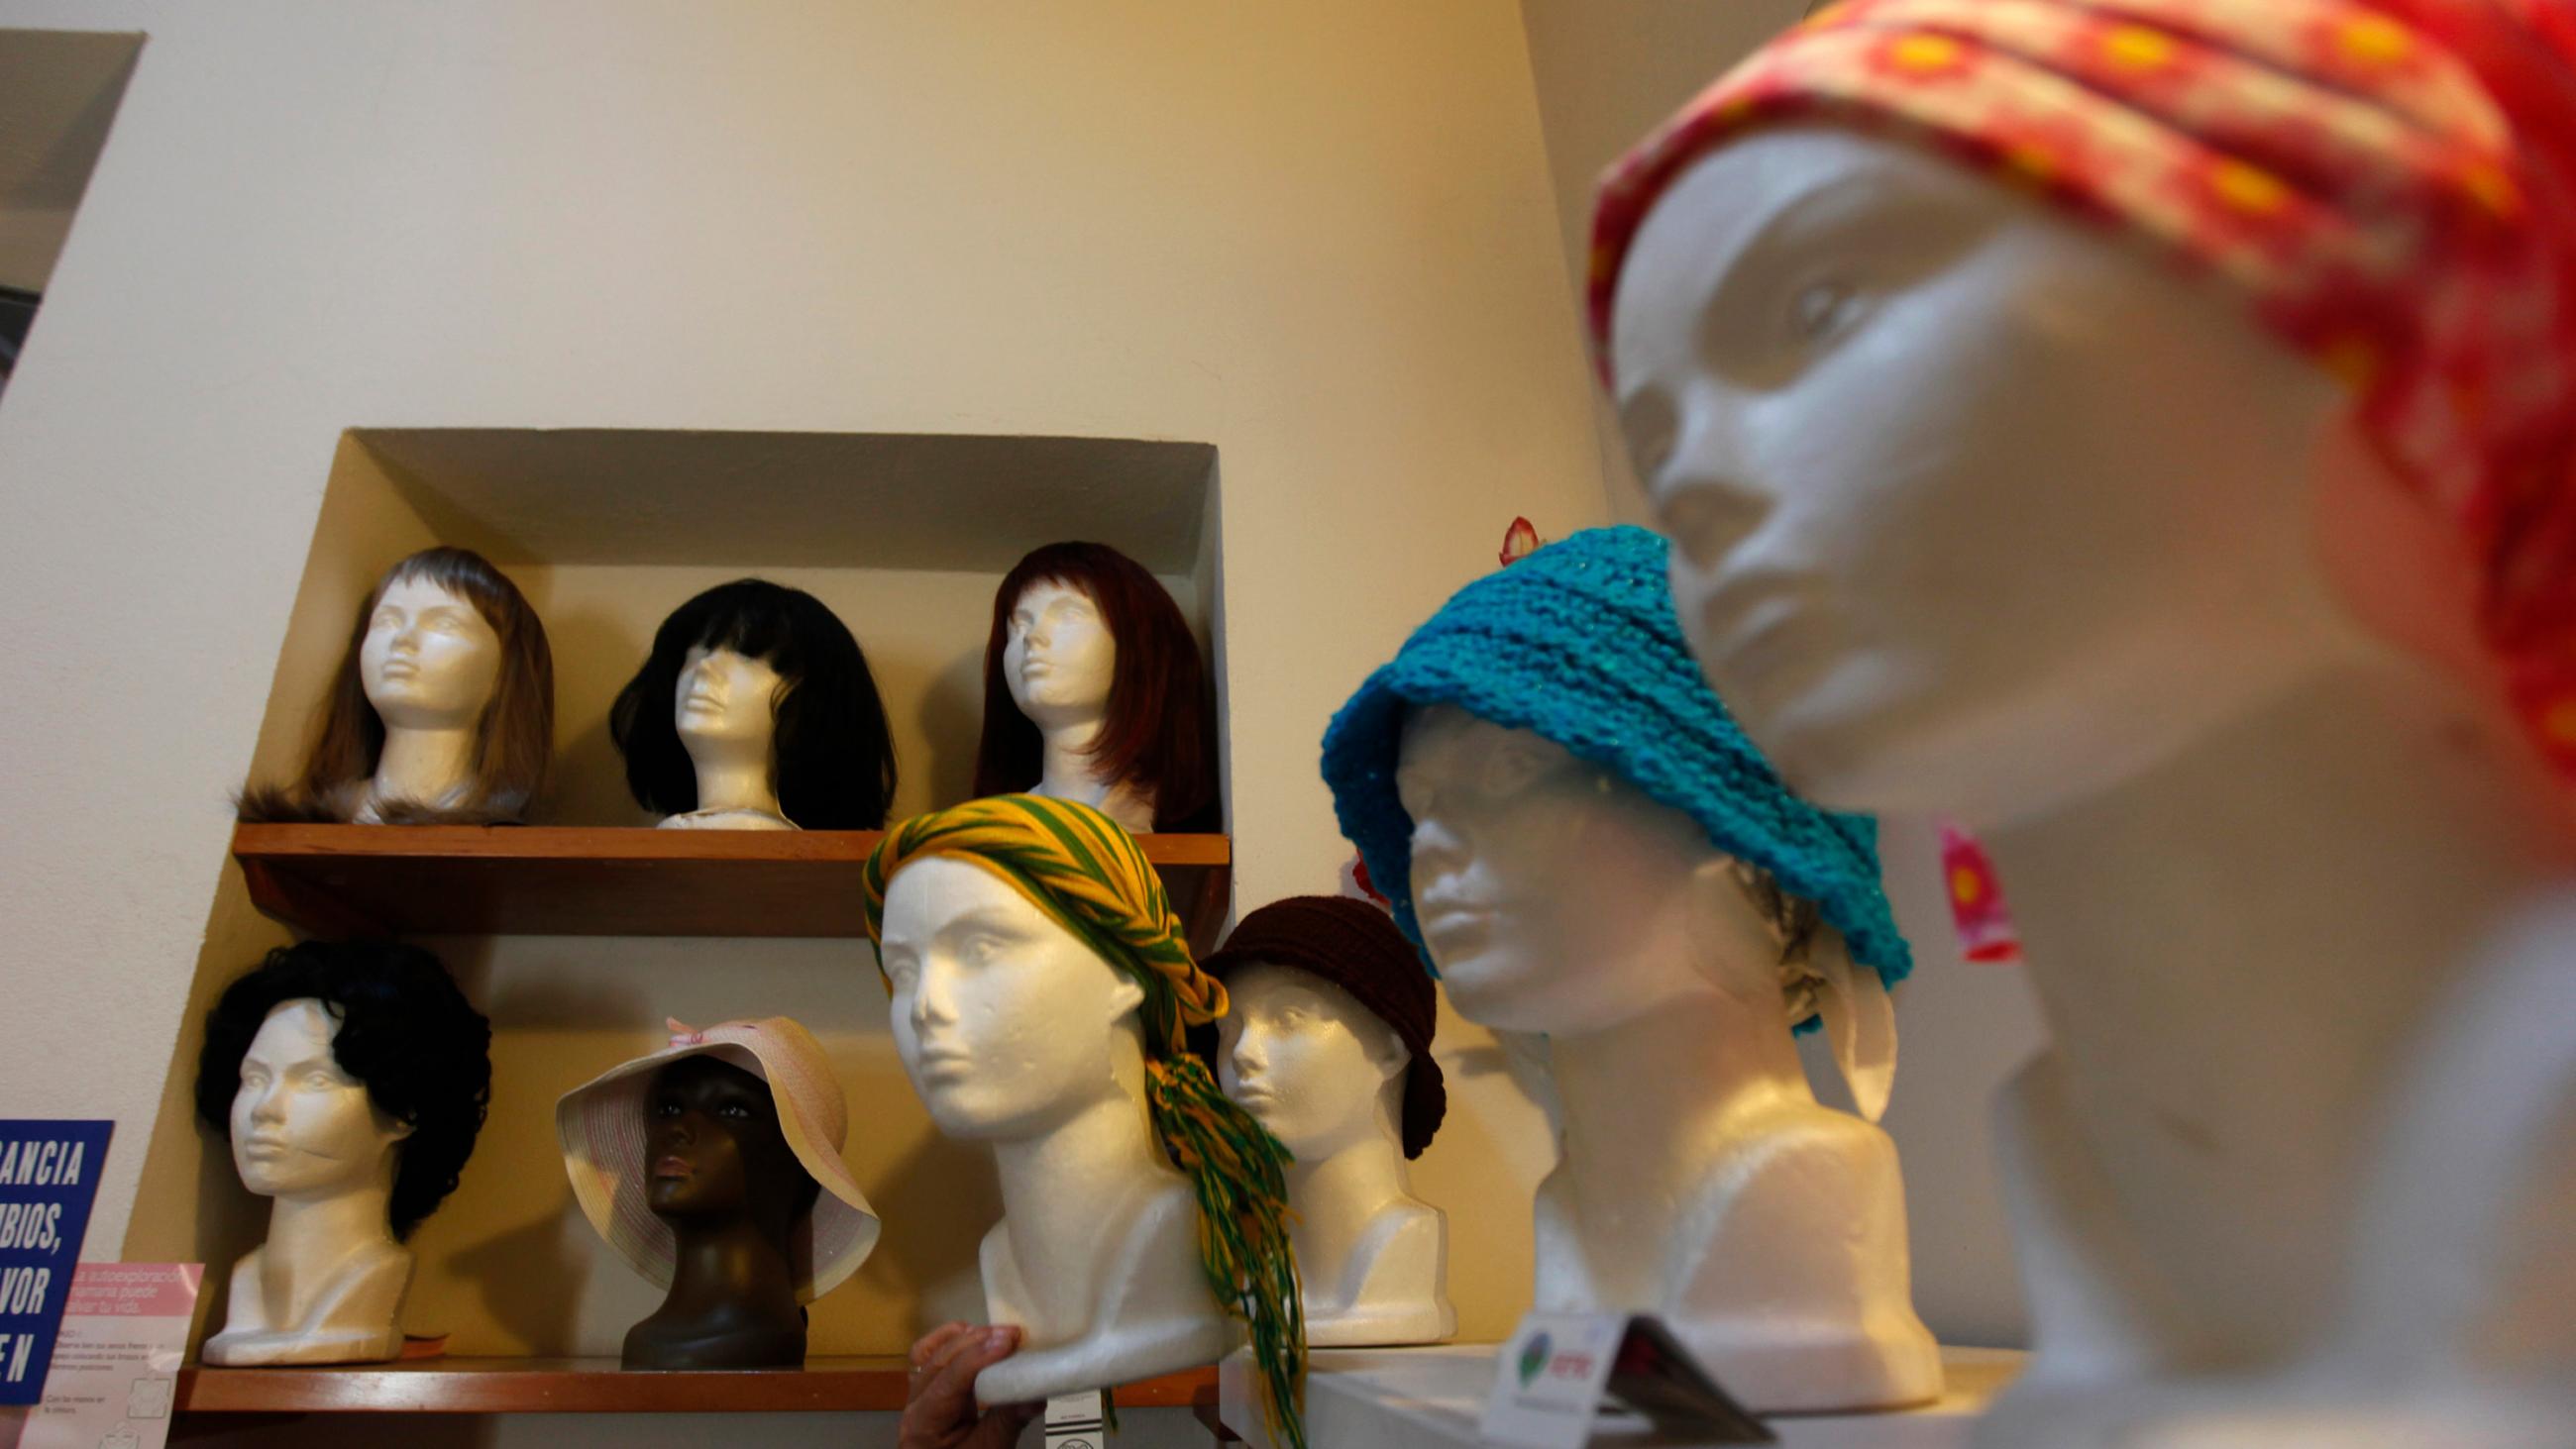 The photo shows a room with mannequin heads and wigs. 